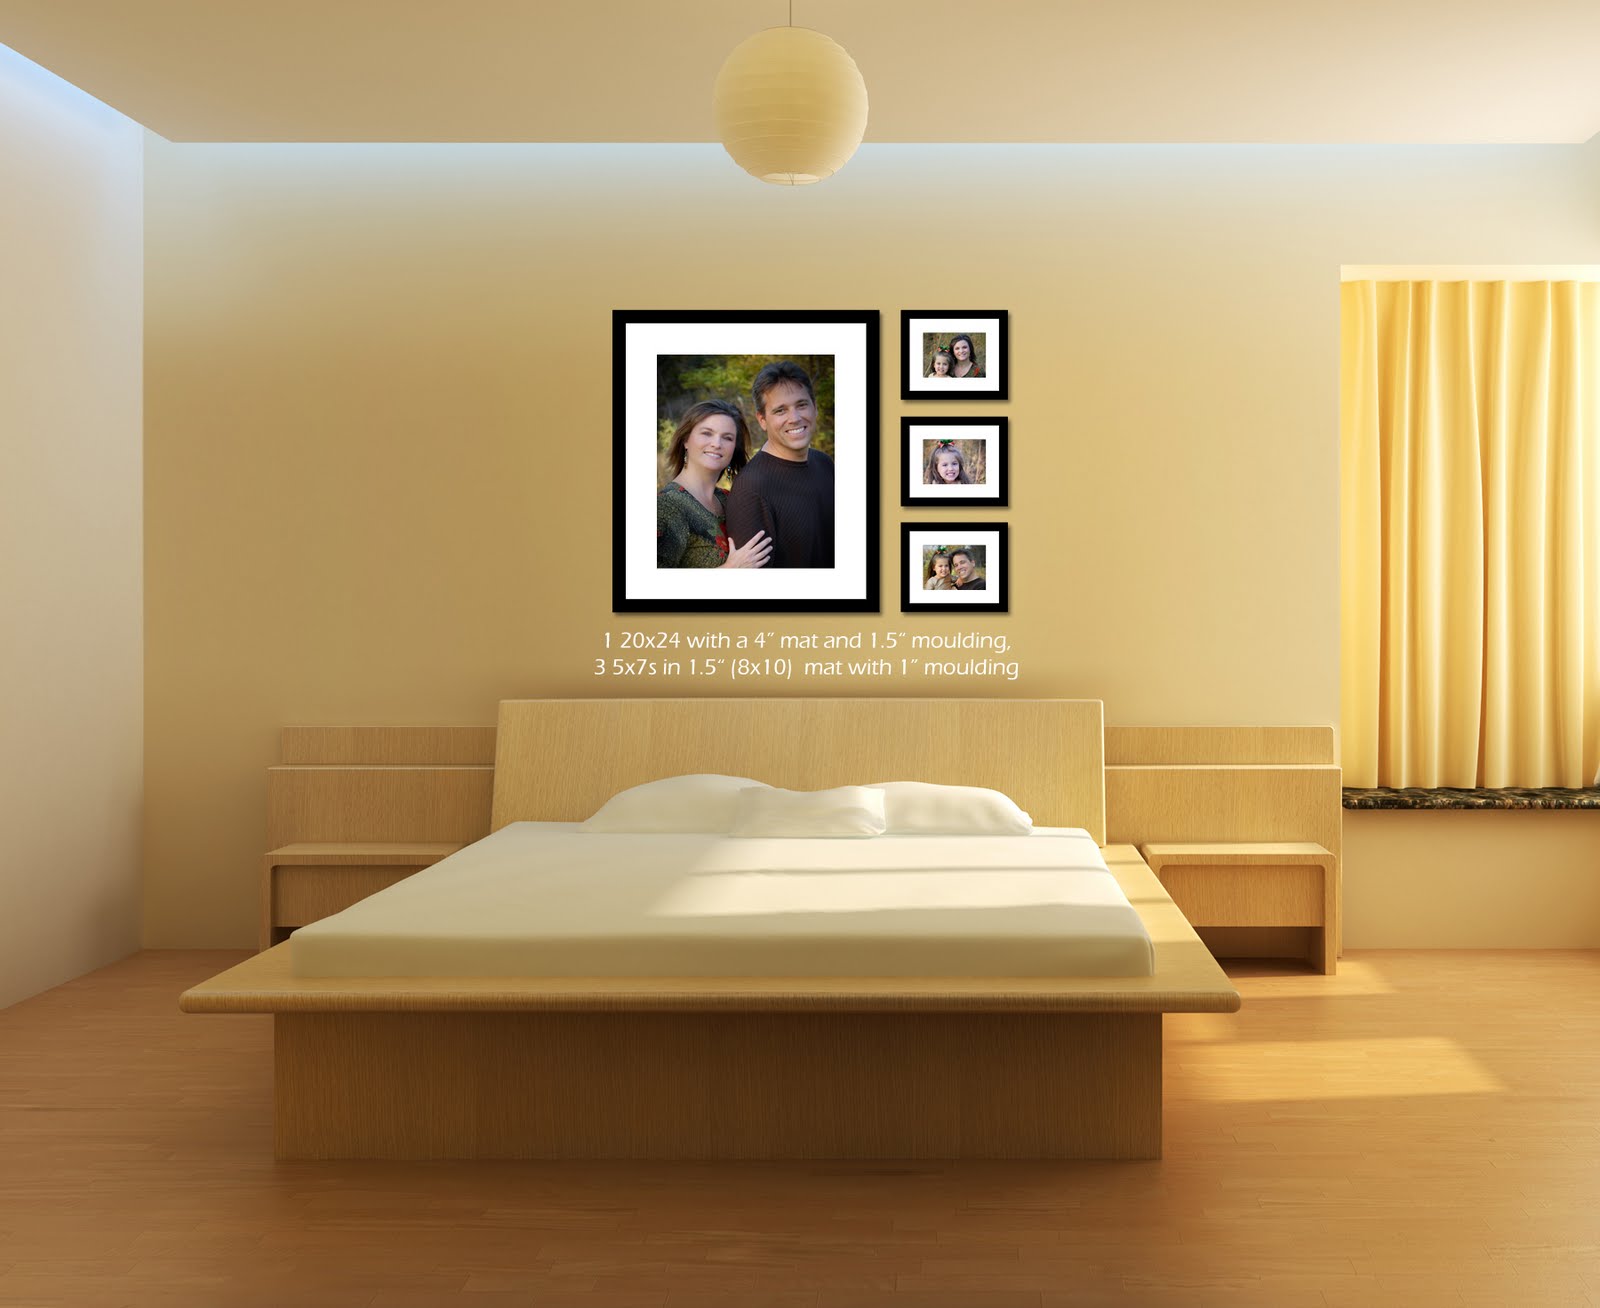 Bedroom Wall Decoration Suggestion - DFW Family Photographer